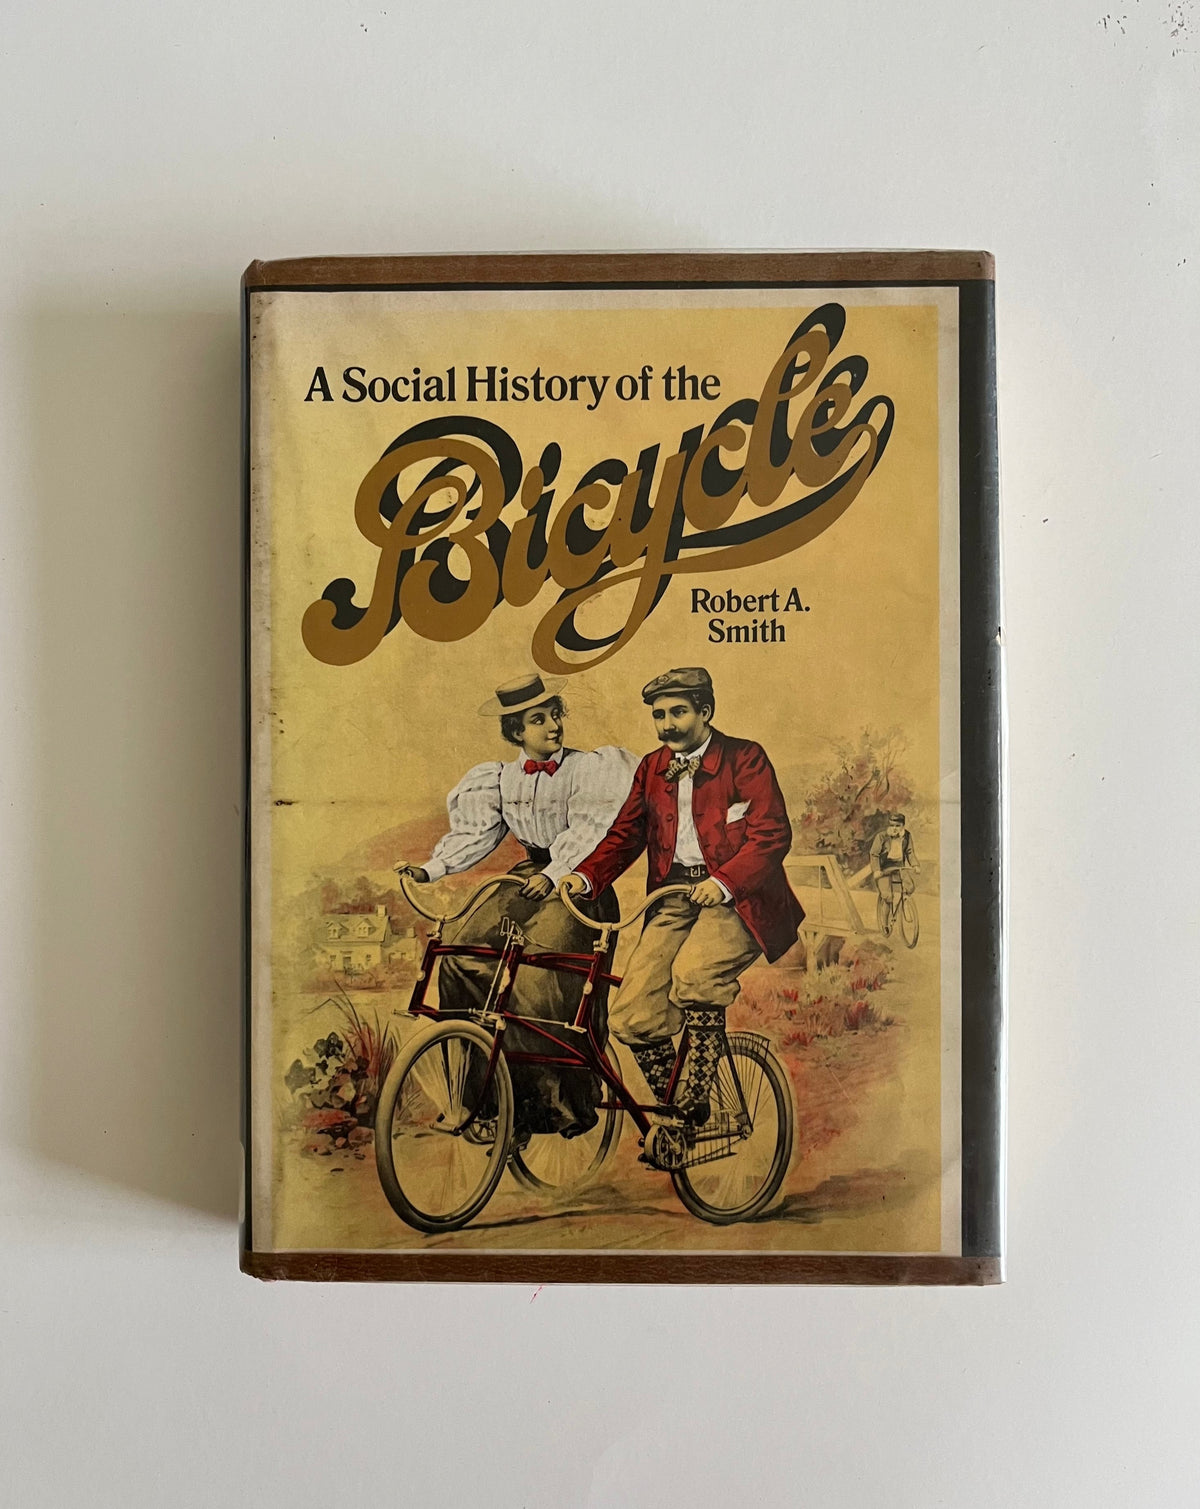 A Social History of the Bicycle by Robert A. Smith